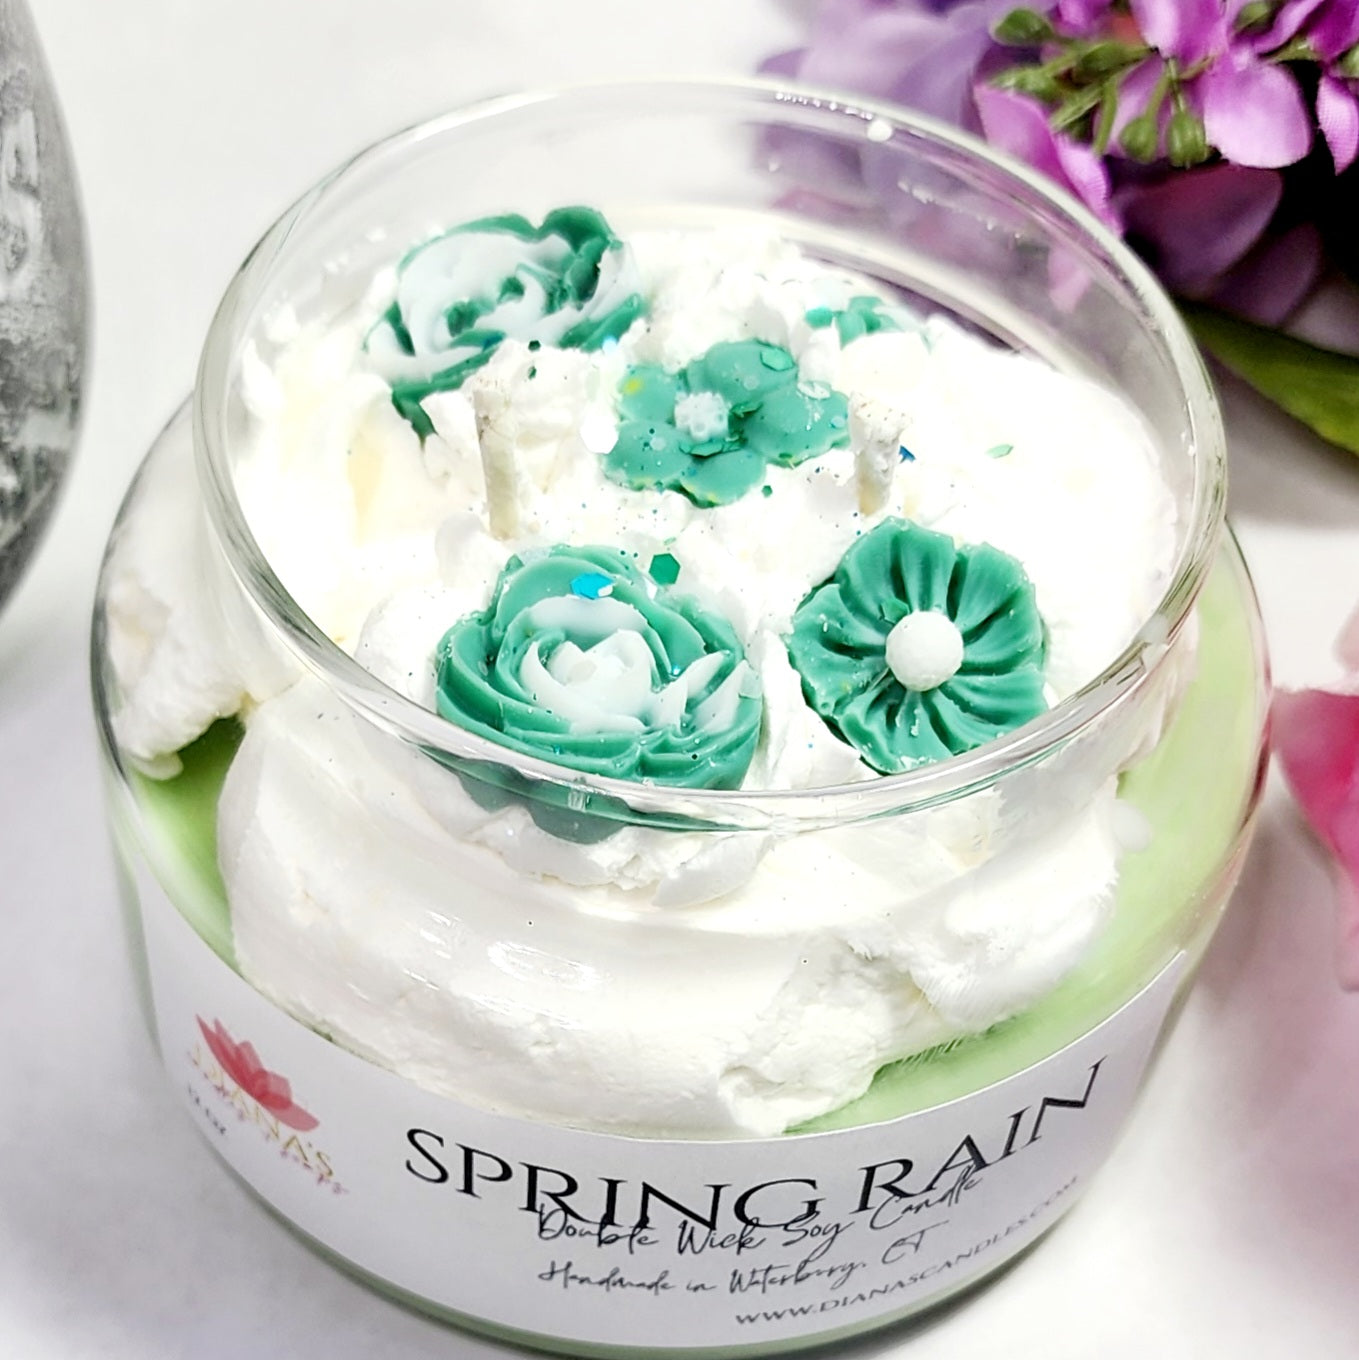 Spring Rain Double Wick Candle Diana's Candles and Soaps 